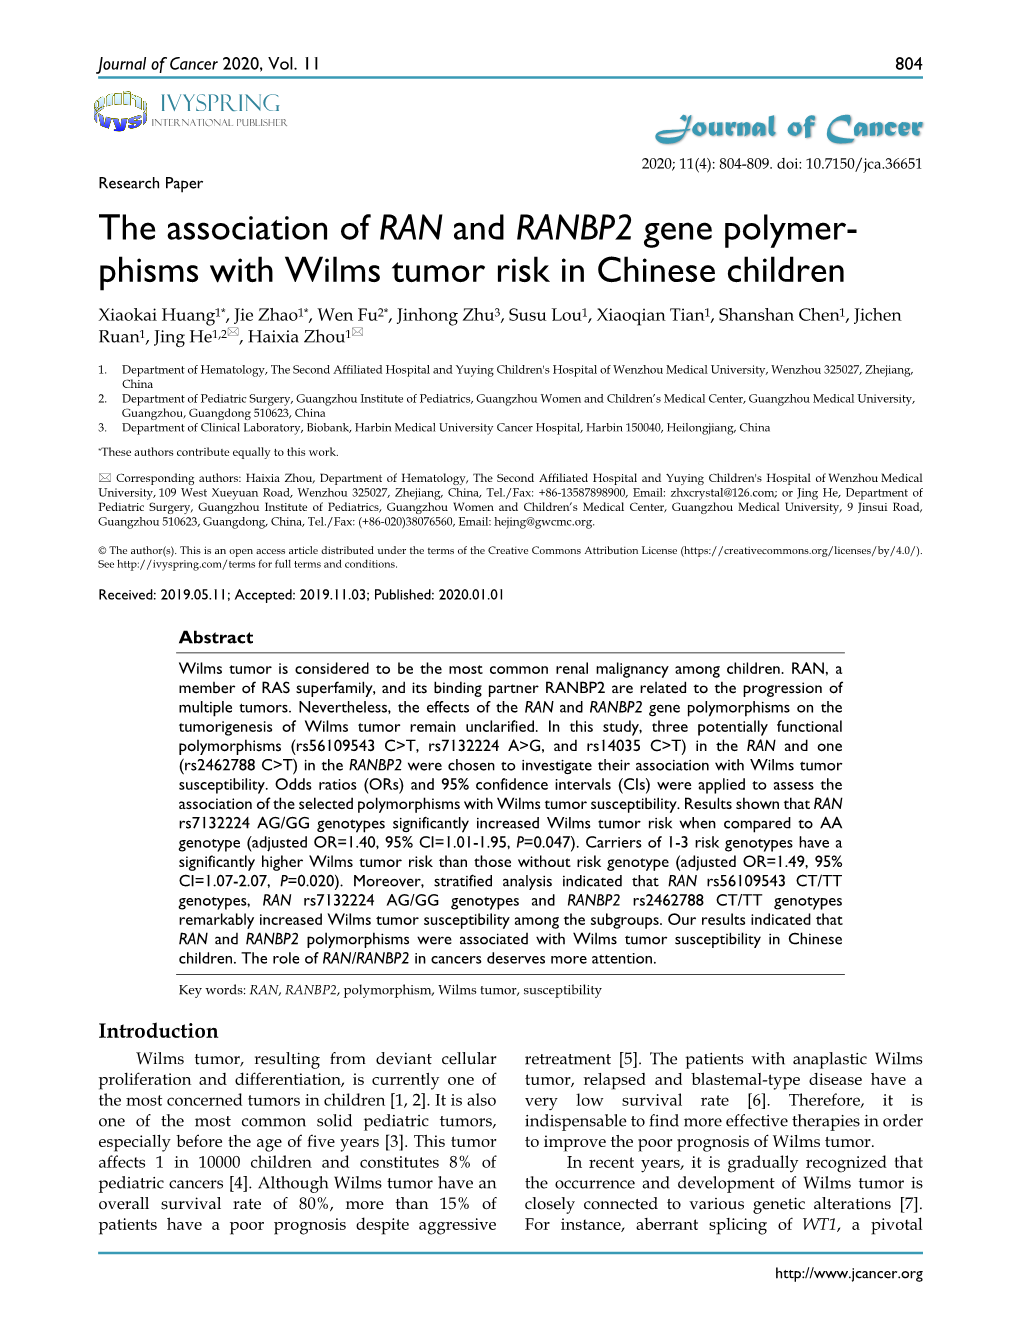 The Association of RAN and RANBP2 Gene Polymer